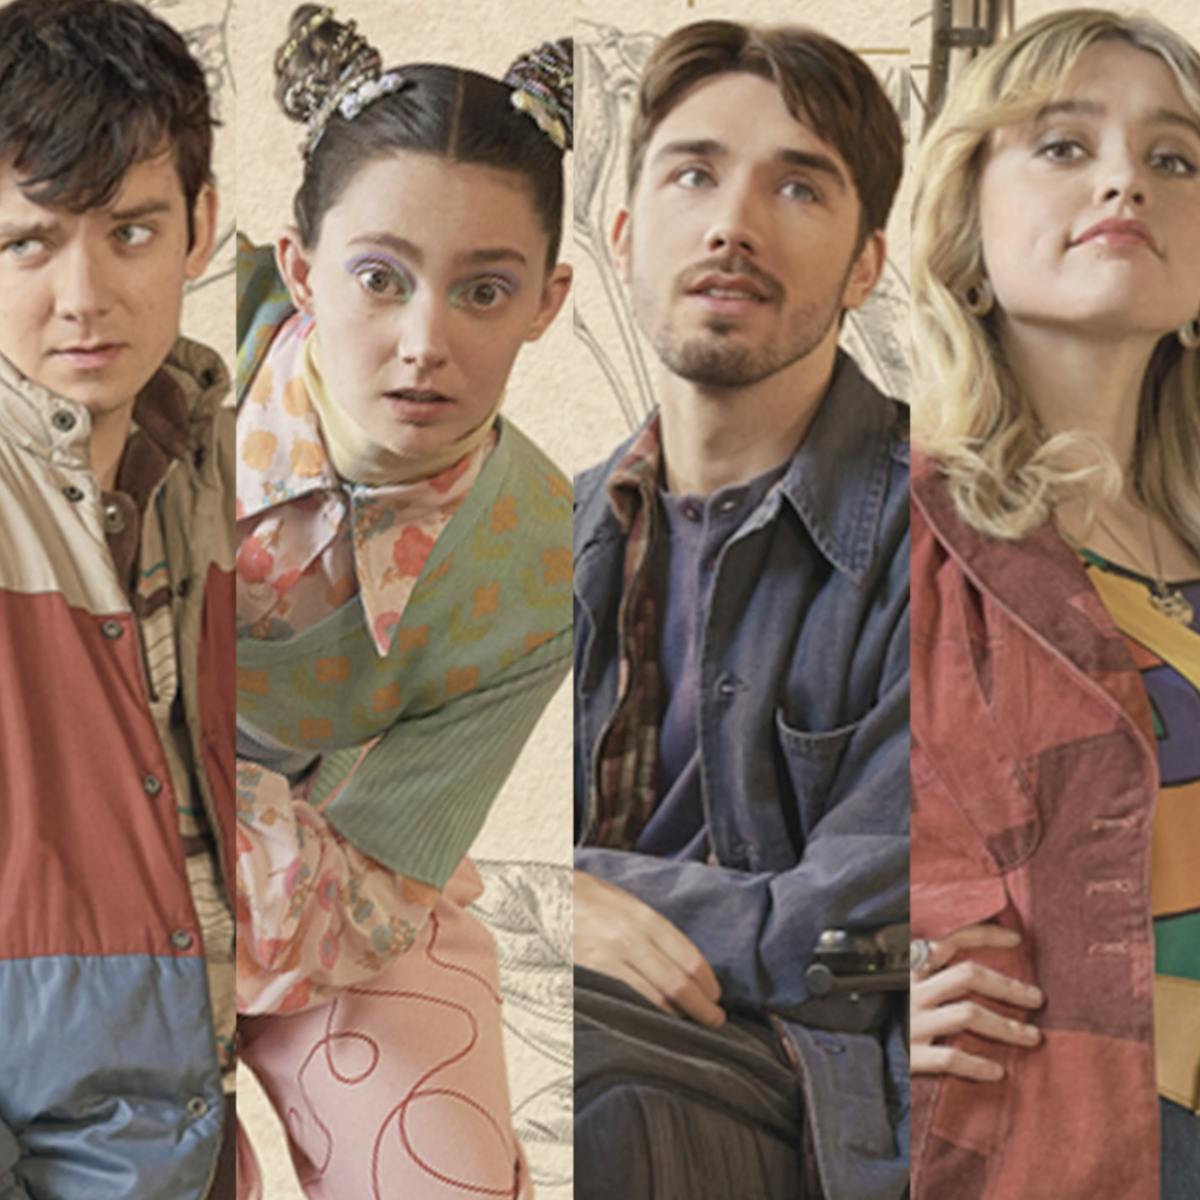 Collage of the cast of Sex Education featuring Otis, Lily, Isaac, Aimee, and Jackson